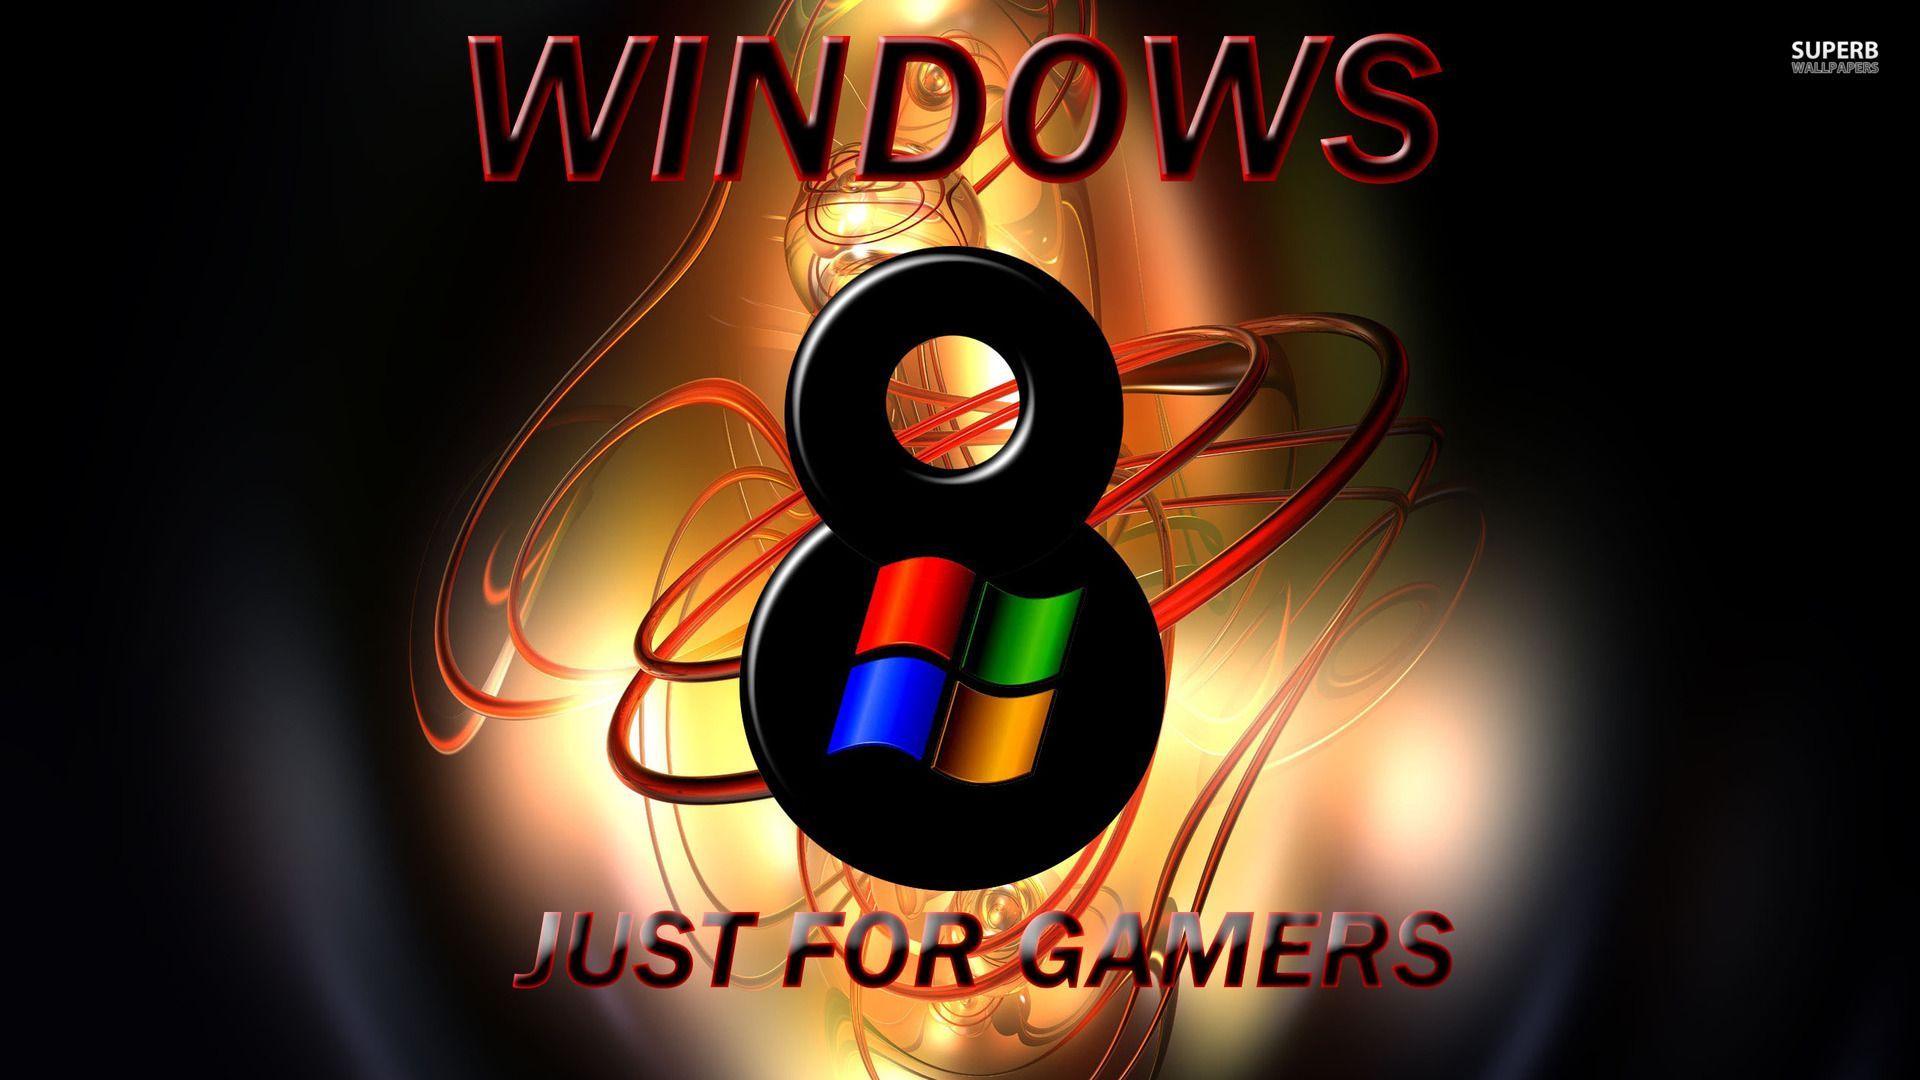 Windows 8 - Just for gamers wallpaper - Computer wallpapers - #20745